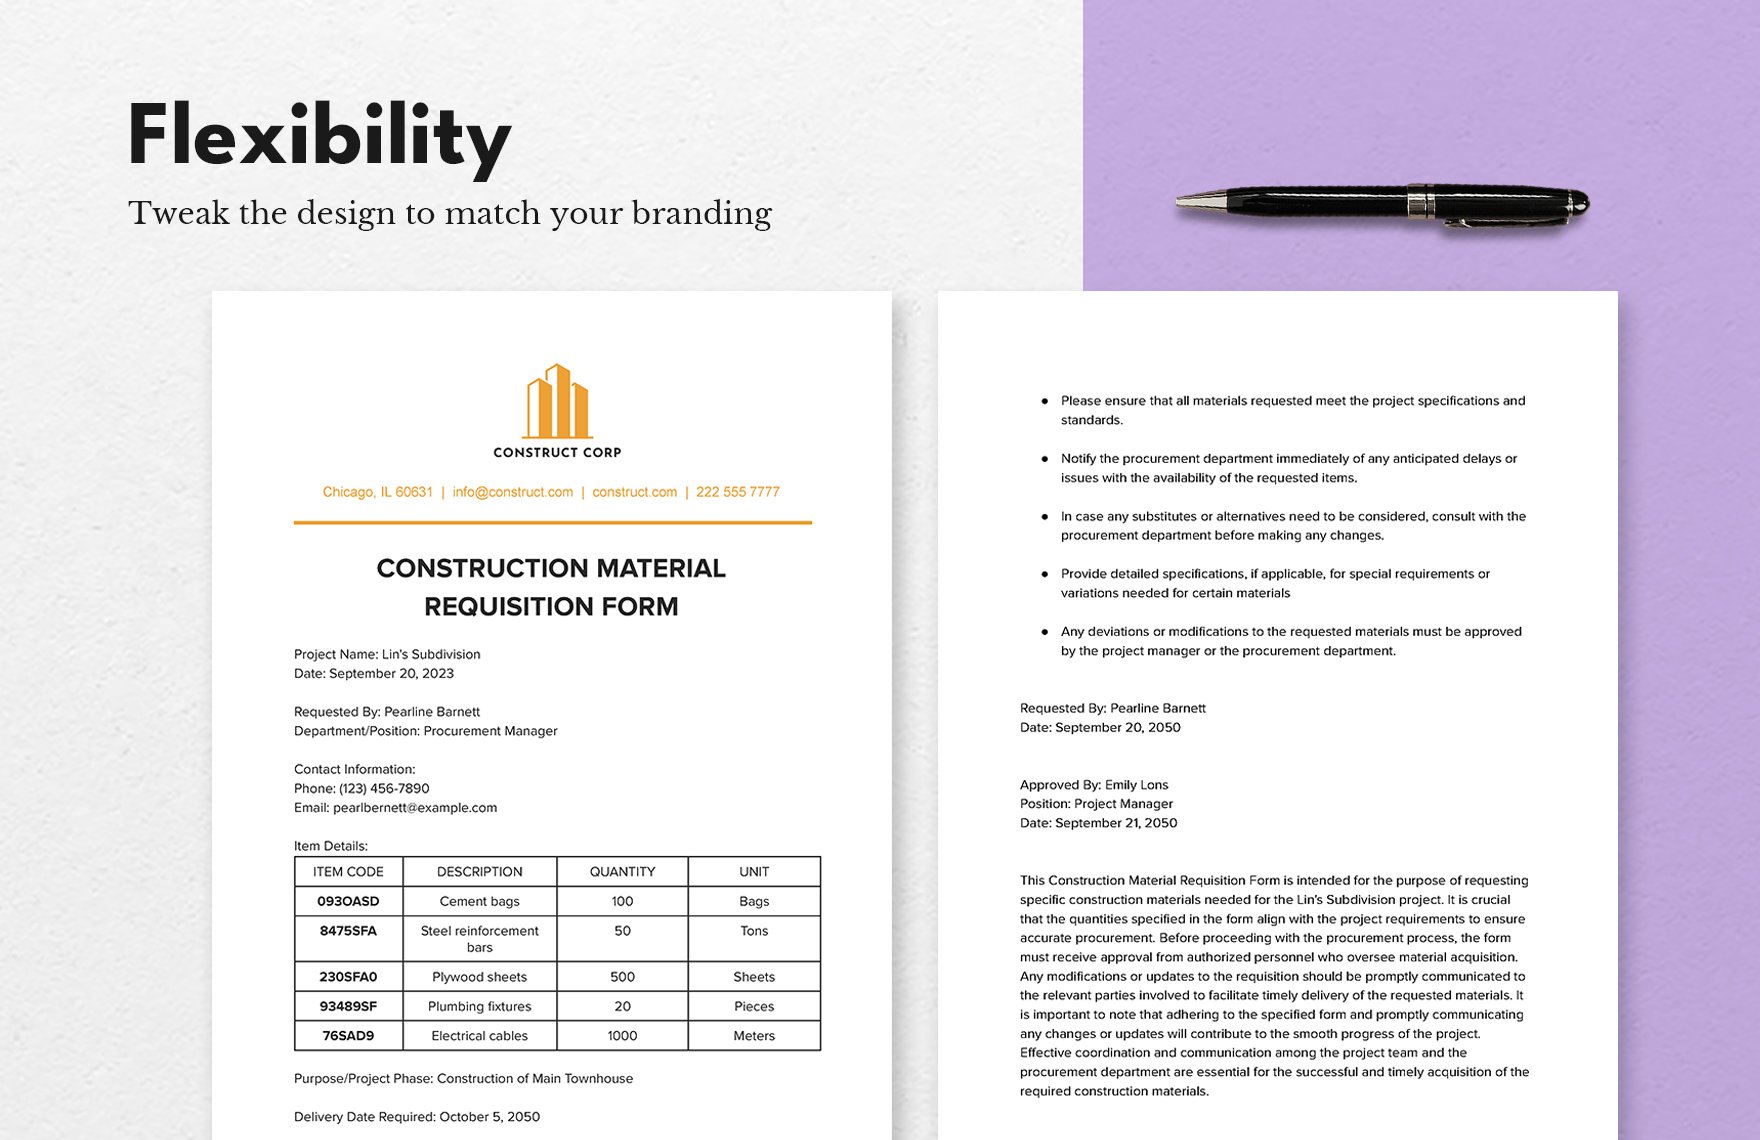 Construction Material Requisition Form Template